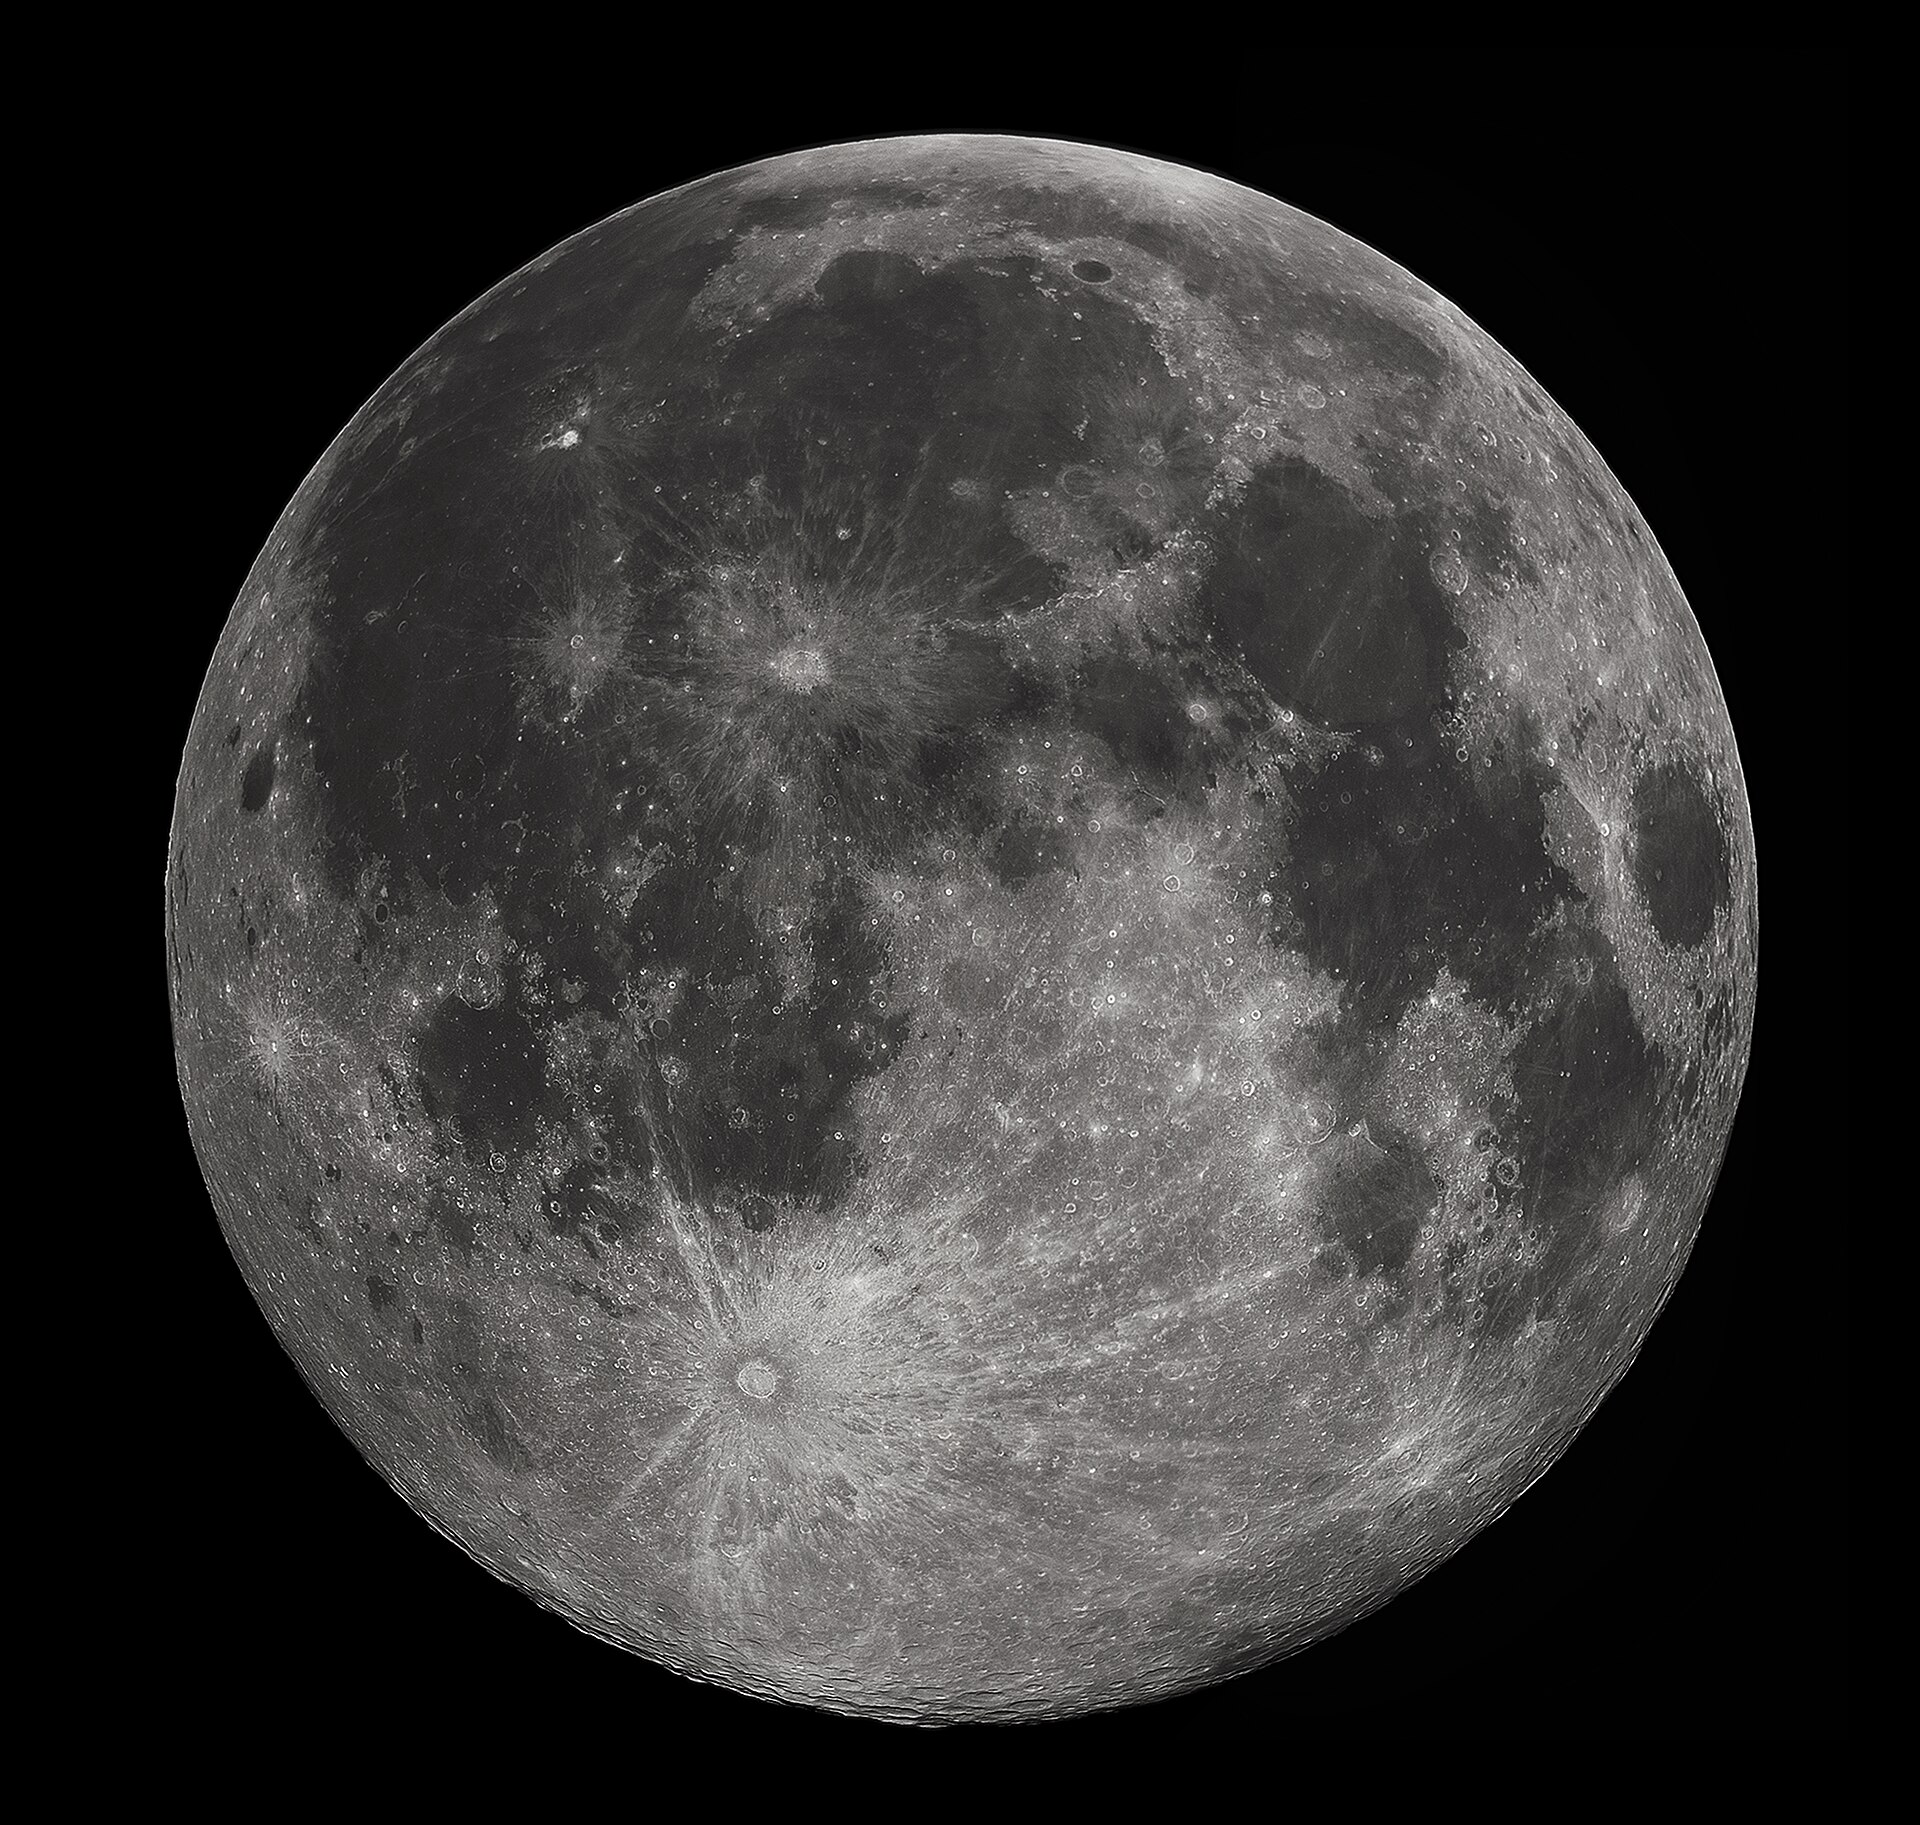 Image of full moon. Source: wikimedia, Gregory H. Revera